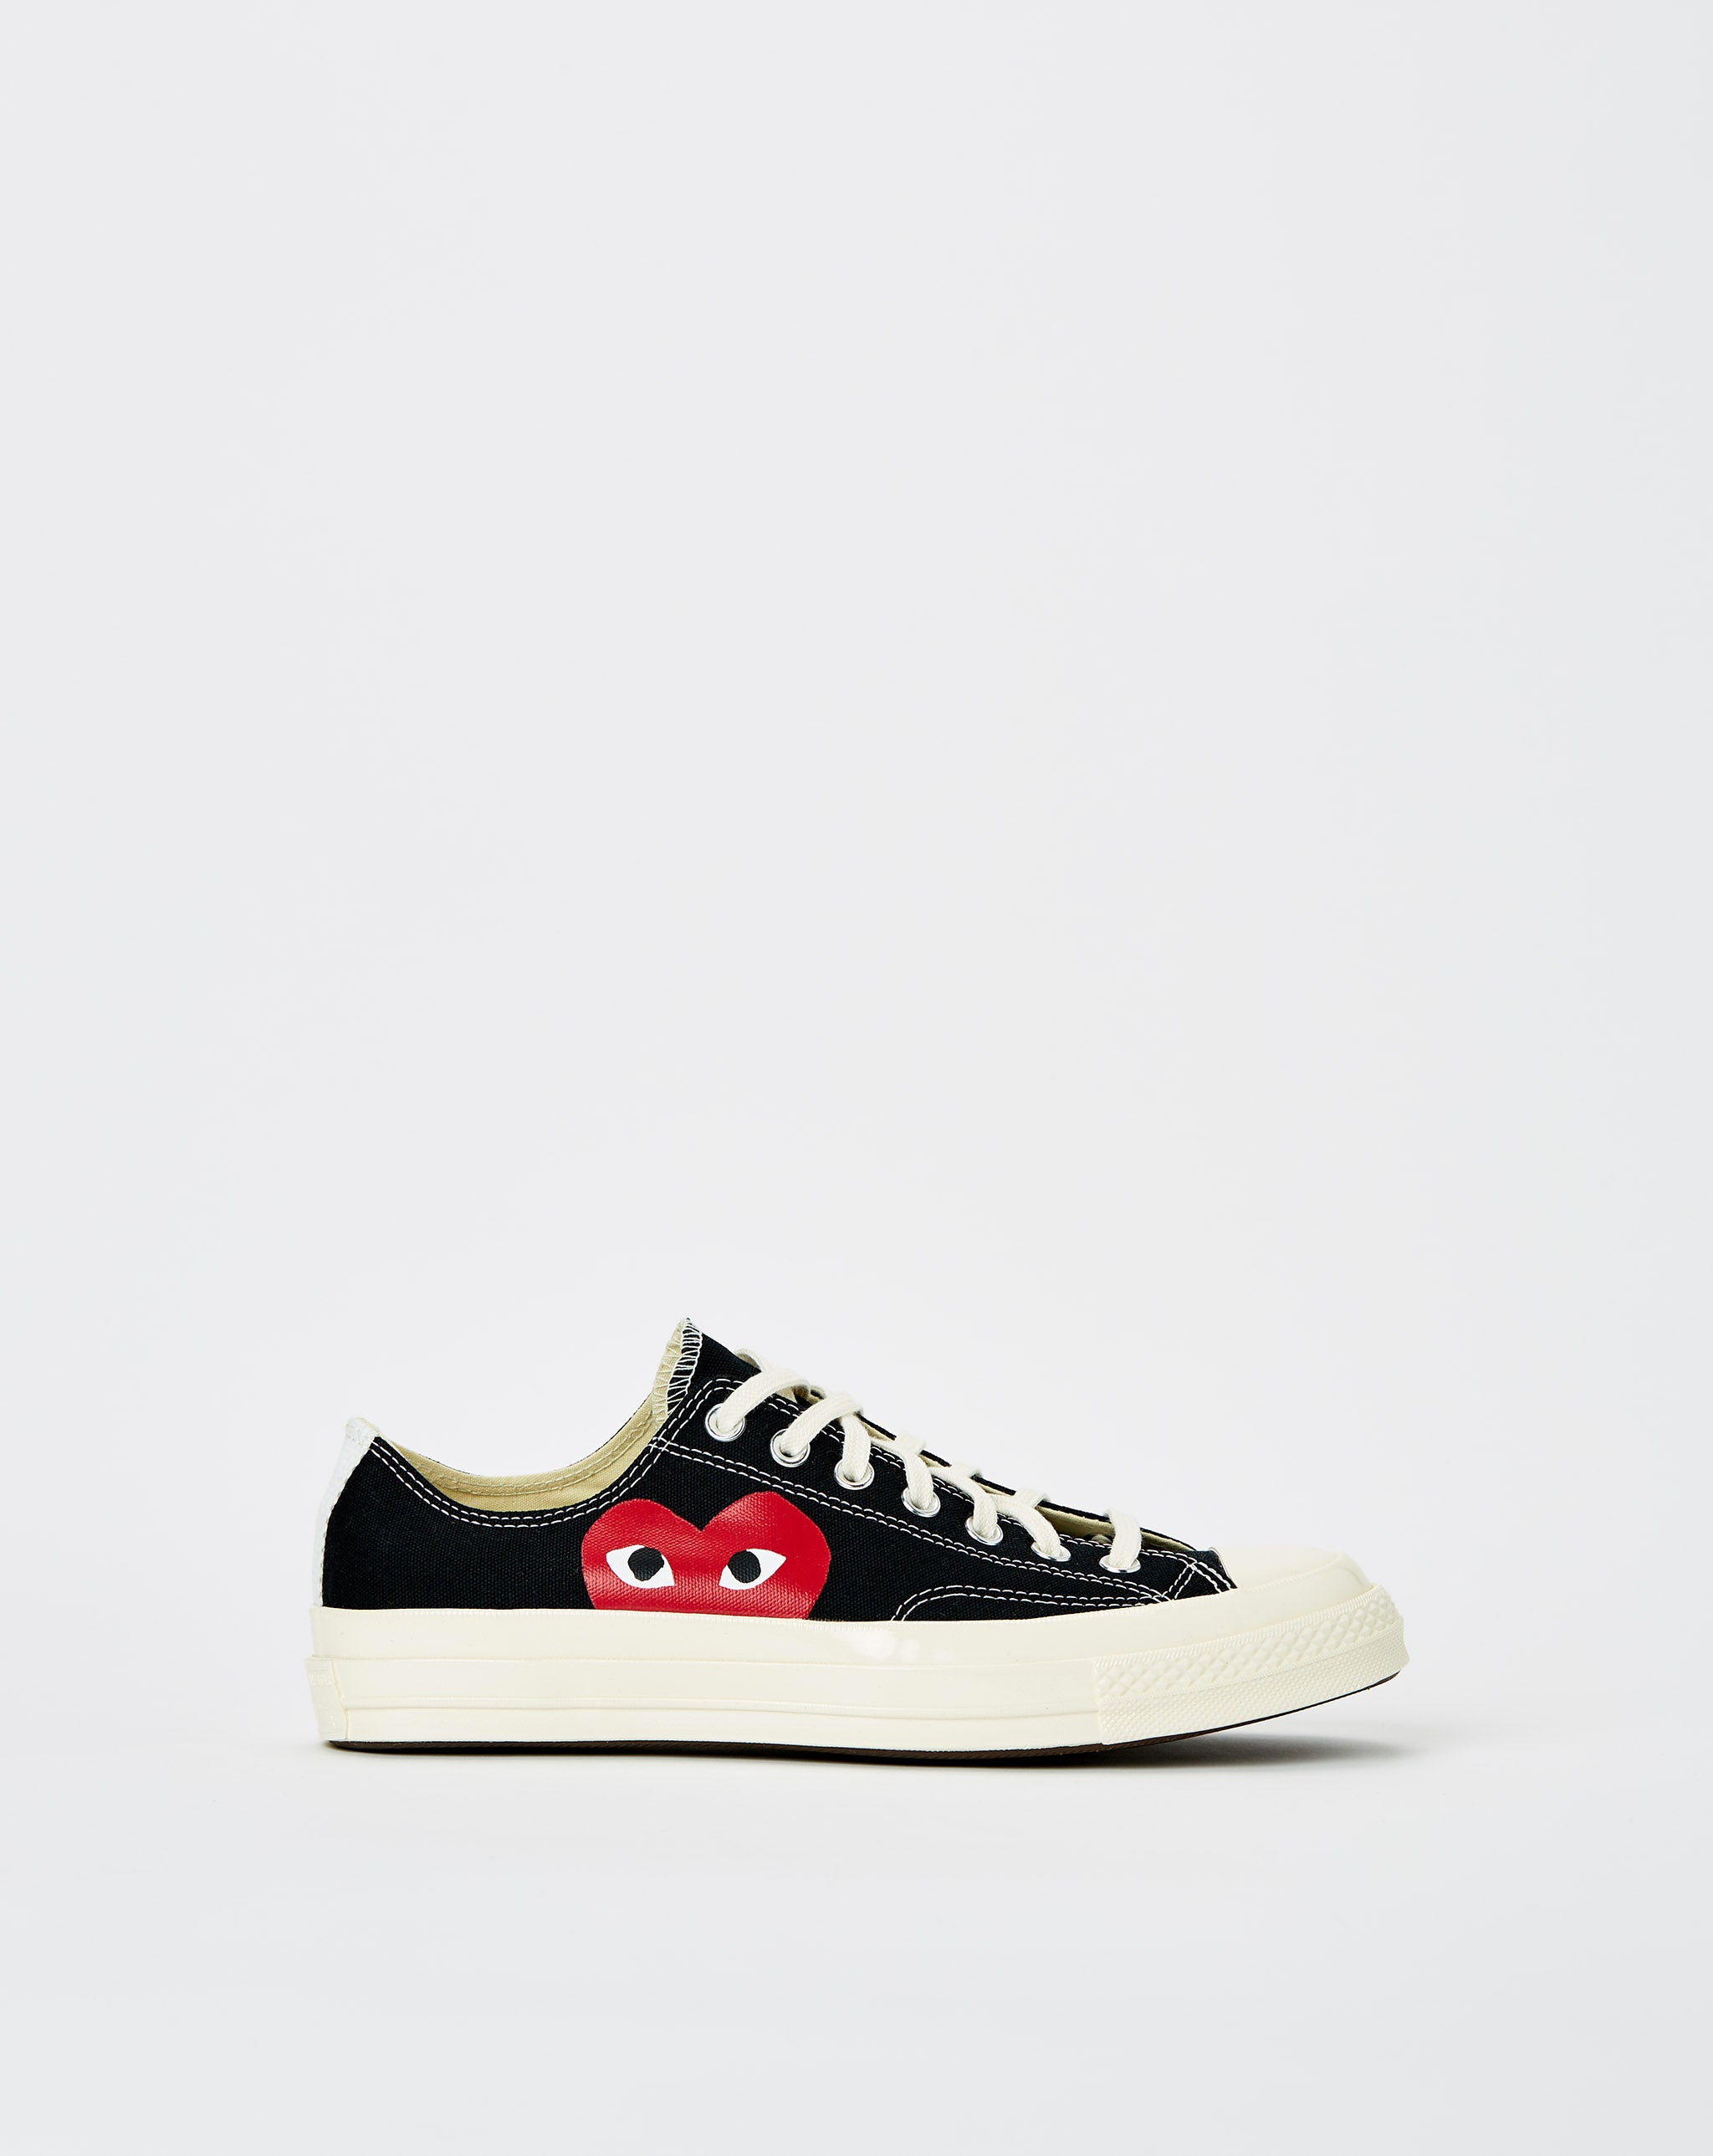 Converse x Comme des Garcons CDG Chuck Taylor All Star 1970s OX – Xhibition